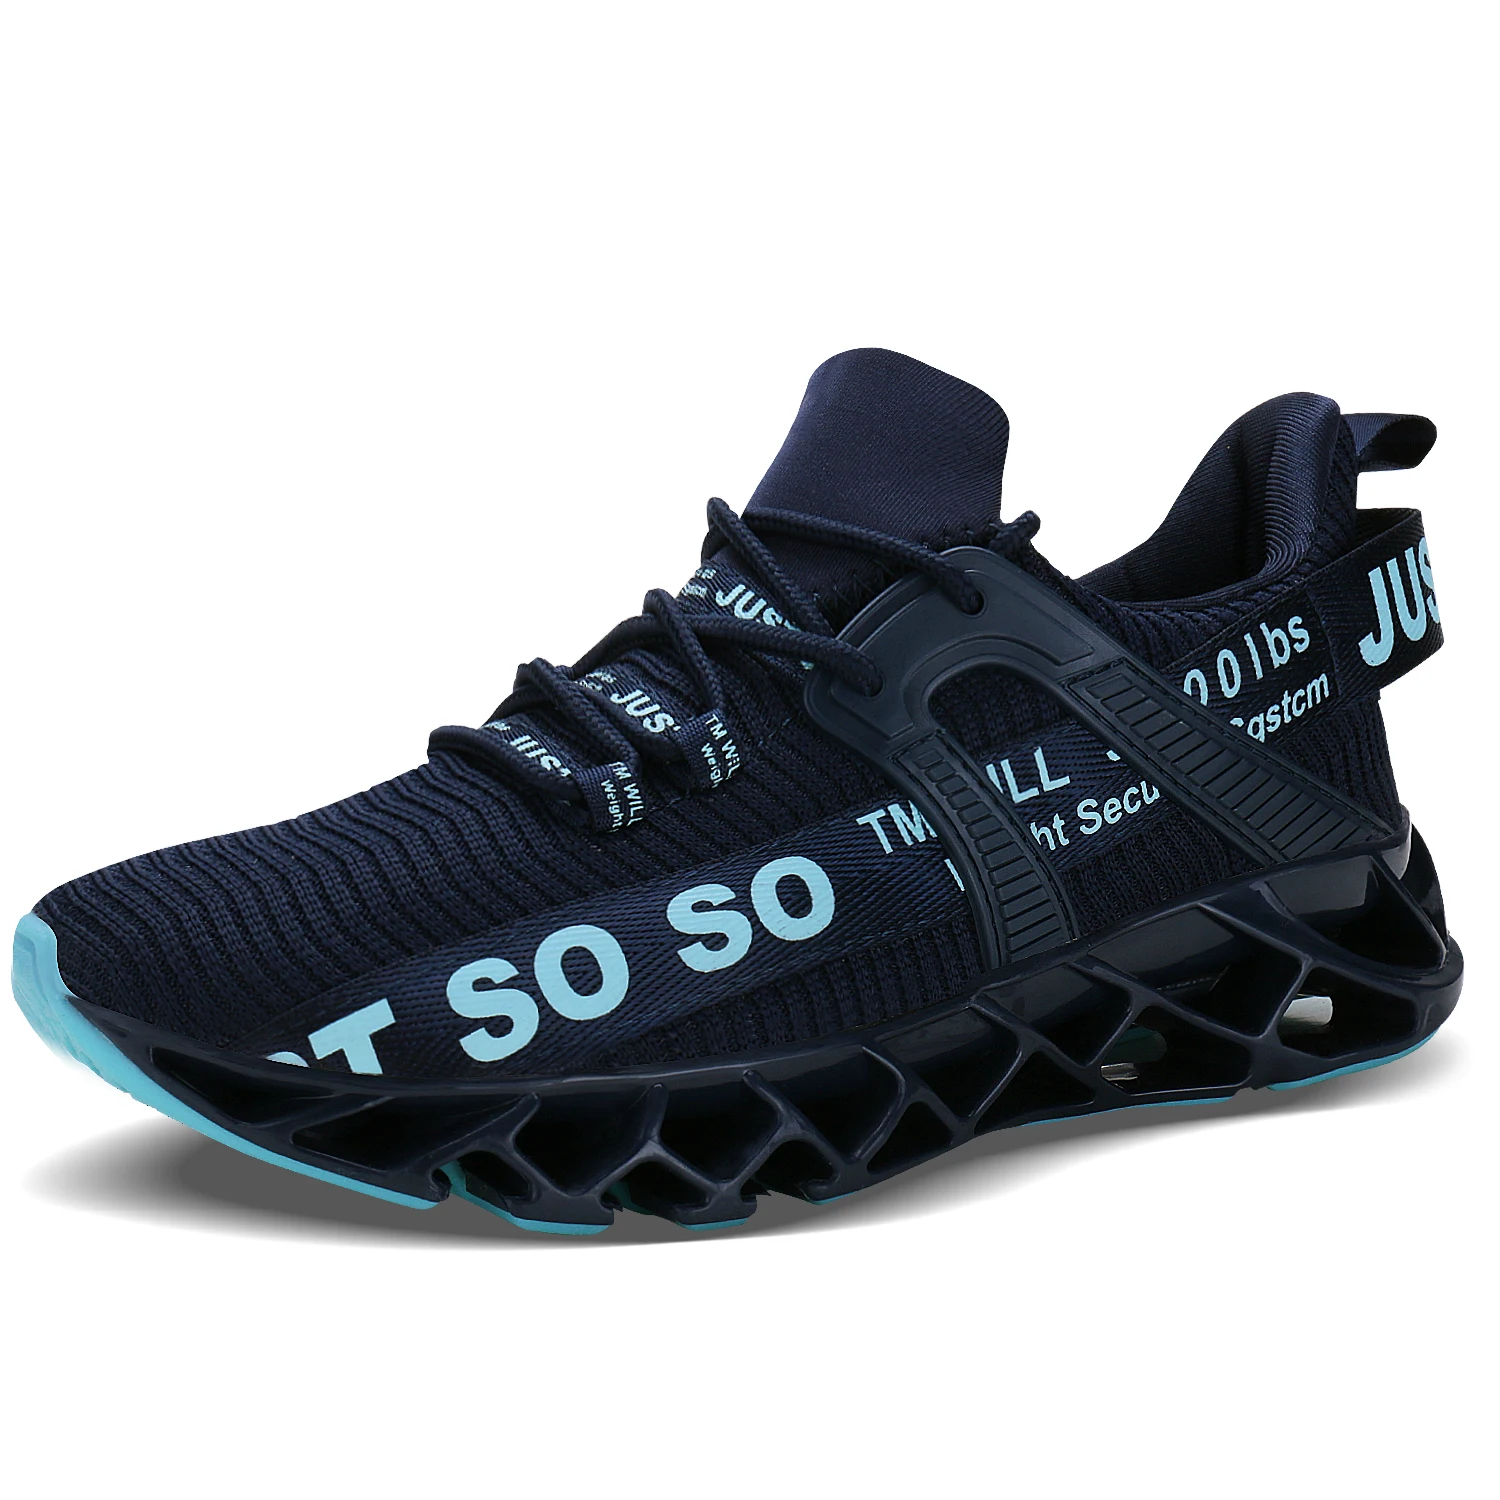 Just So So Mens Running Shoes Non Slip Athletic Walking Blade-type ...